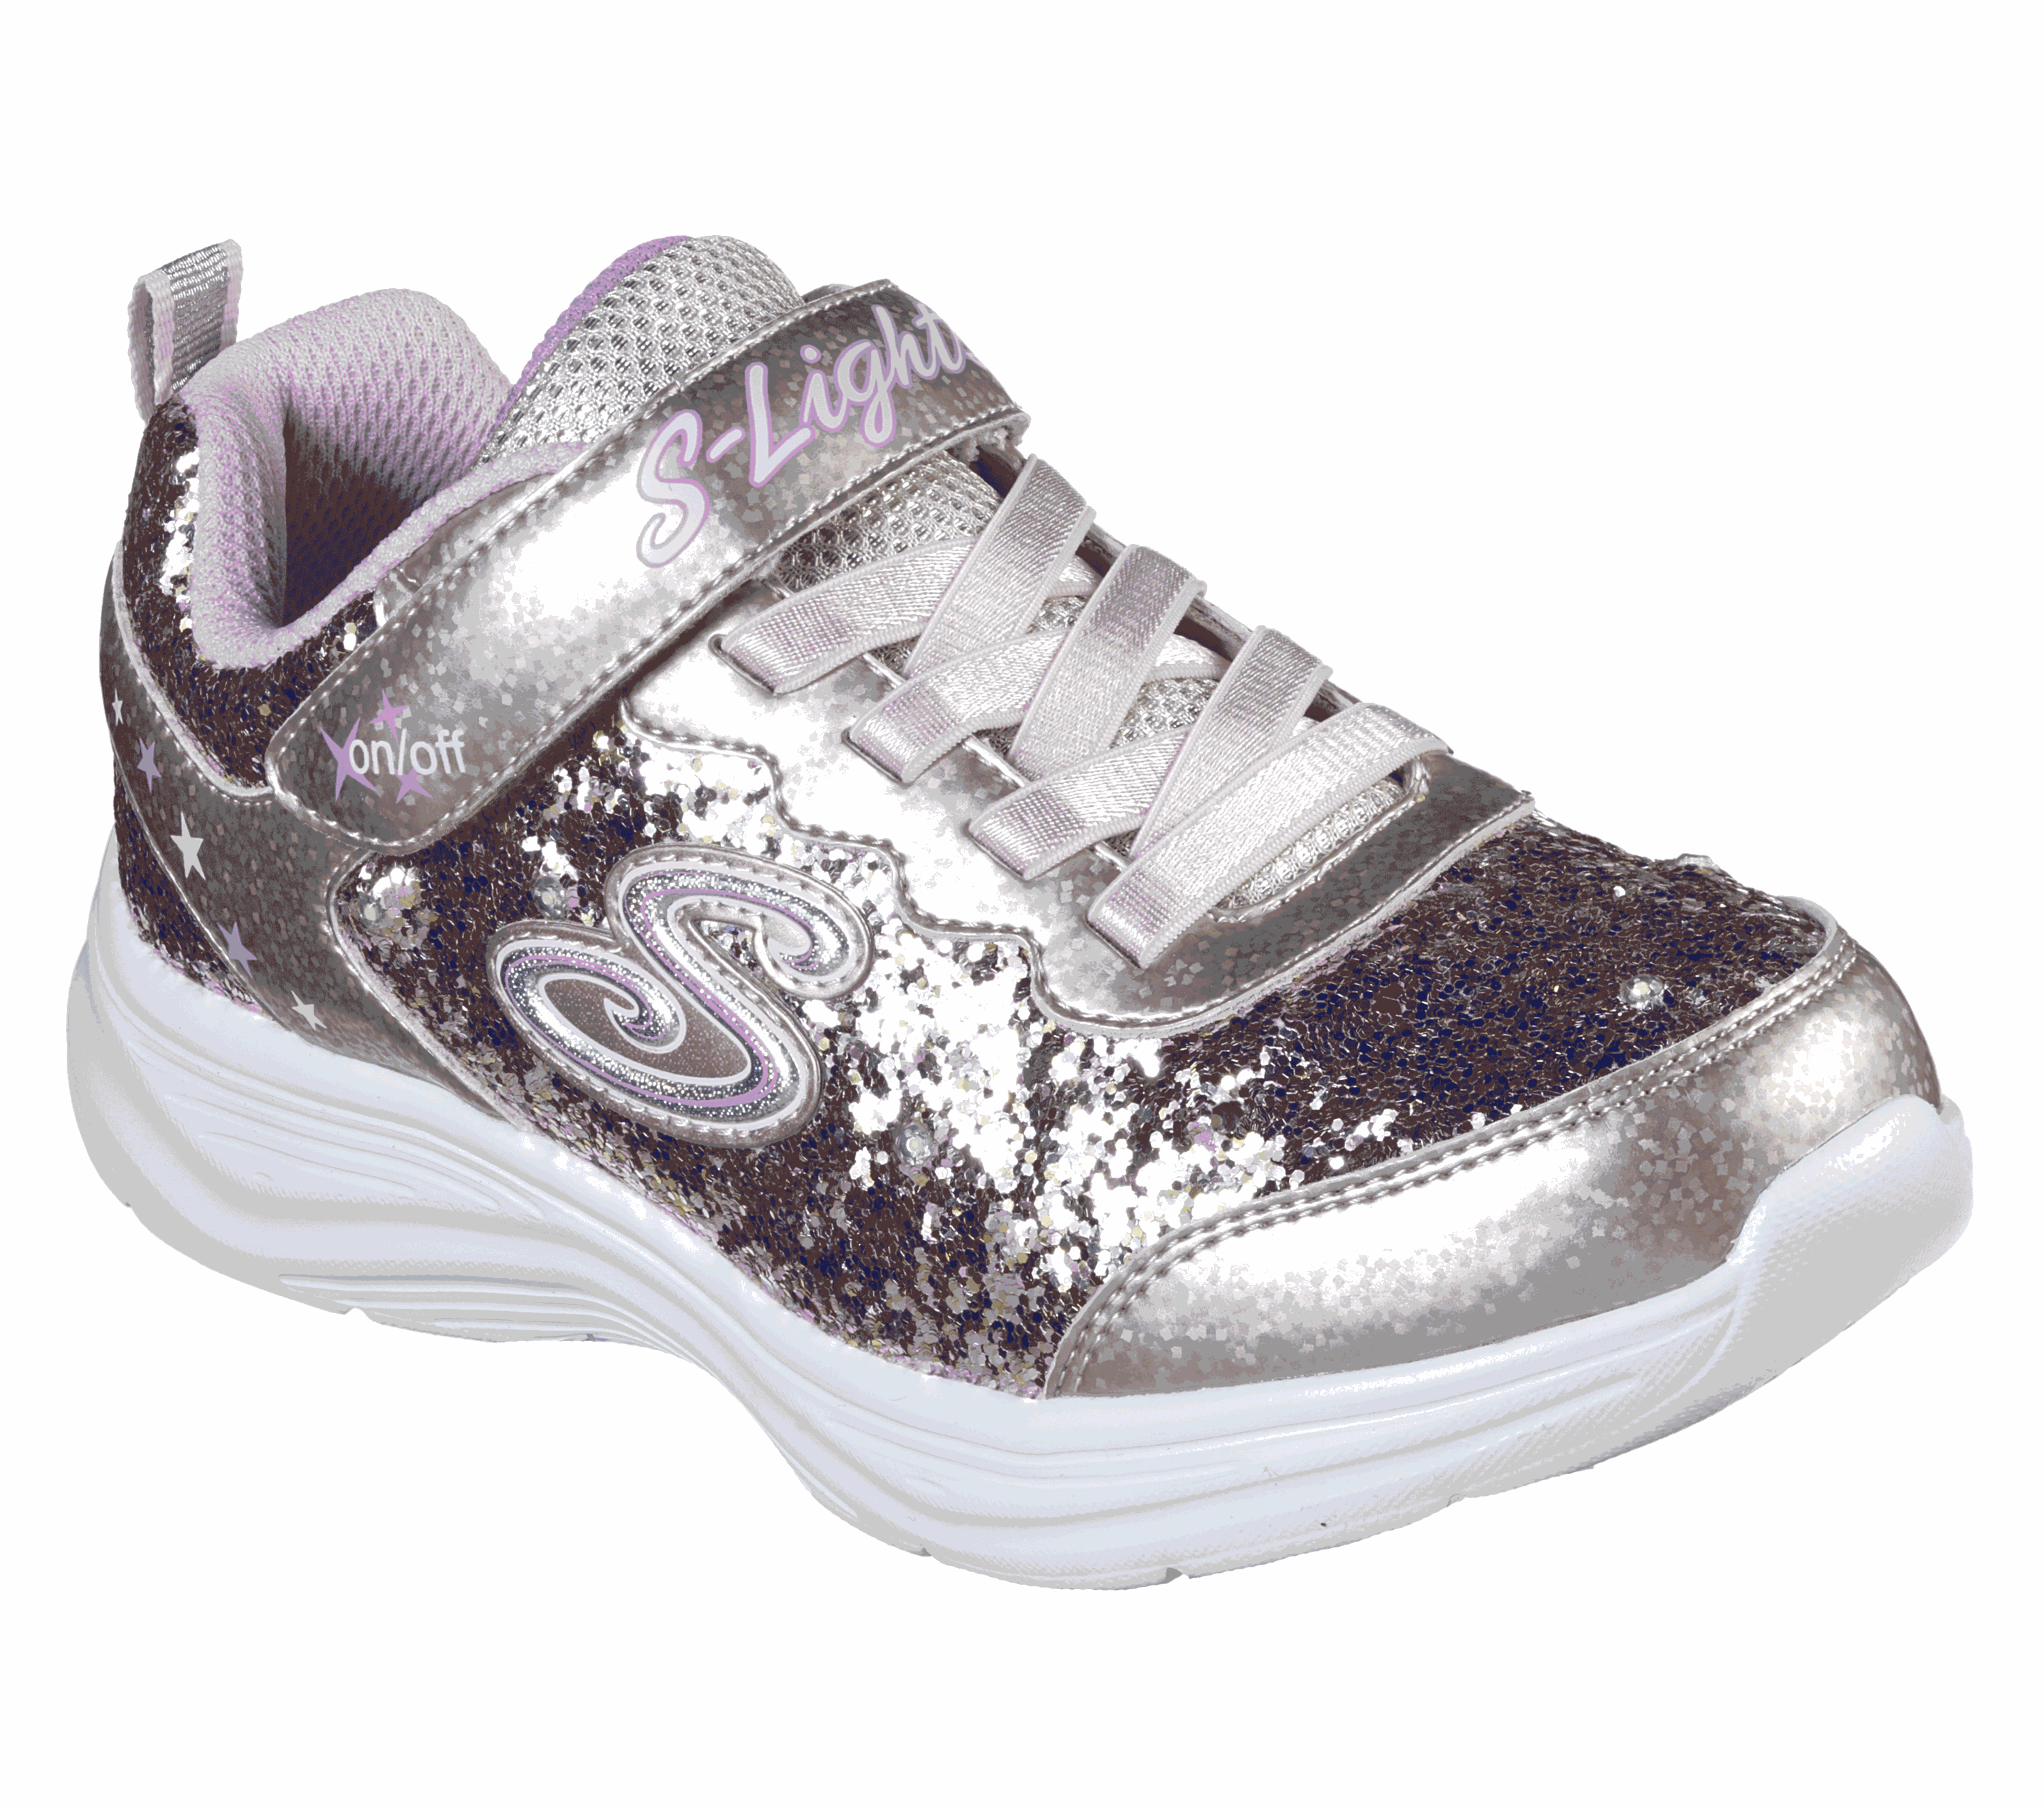 skechers baby light up shoes